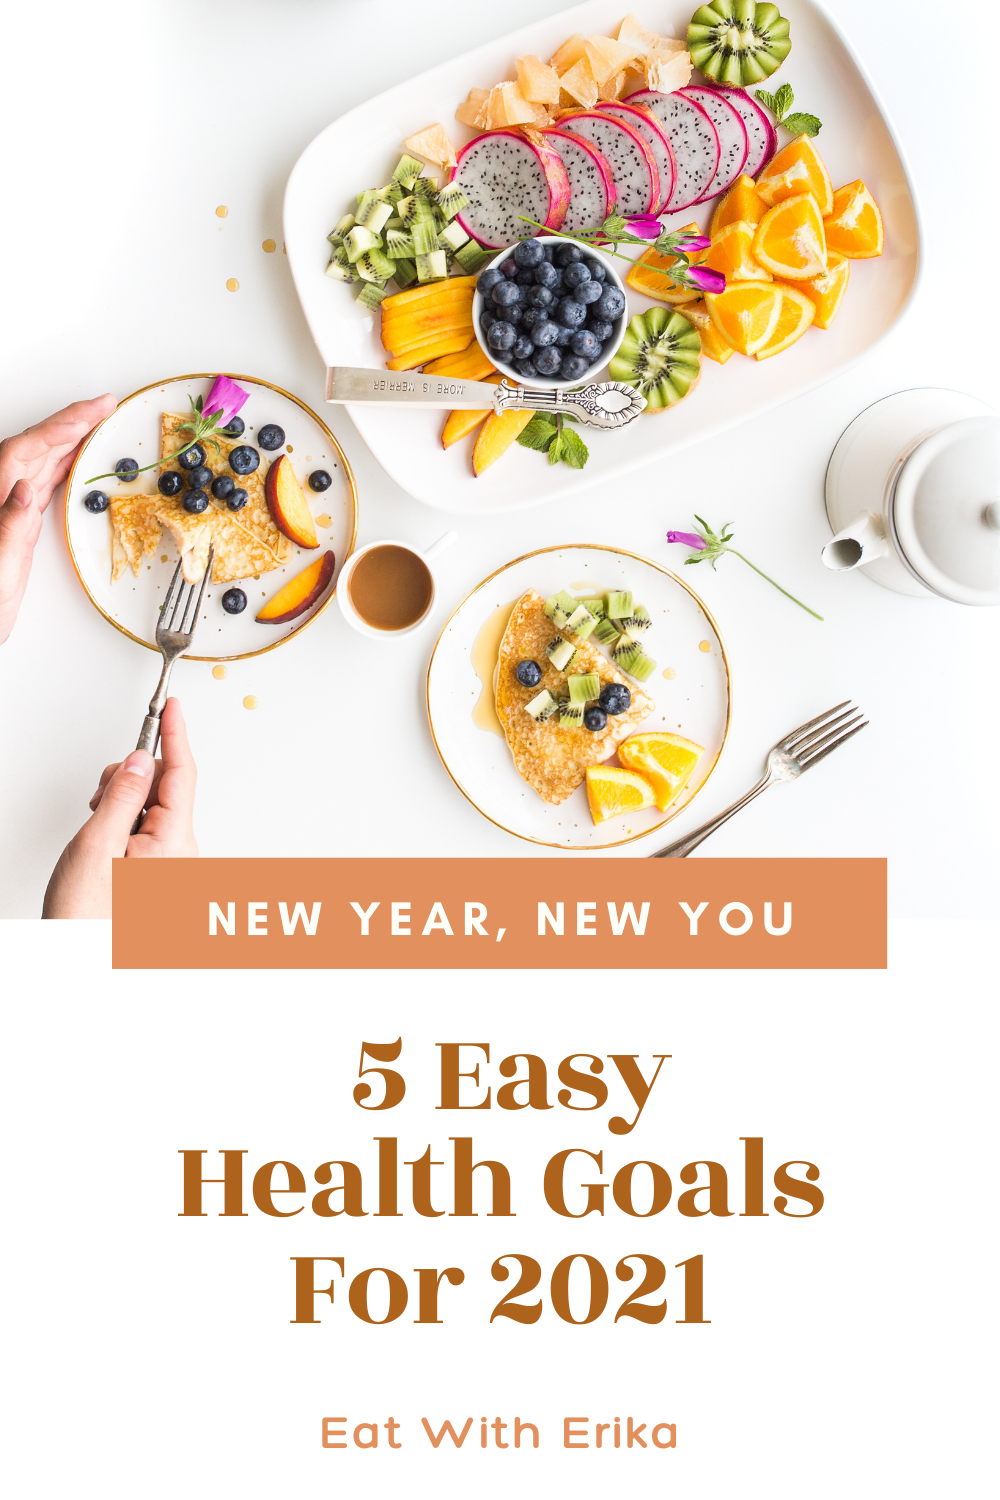 fruit plates with dragon fruit, blueberries, mango, 5 easy health goals for 2021